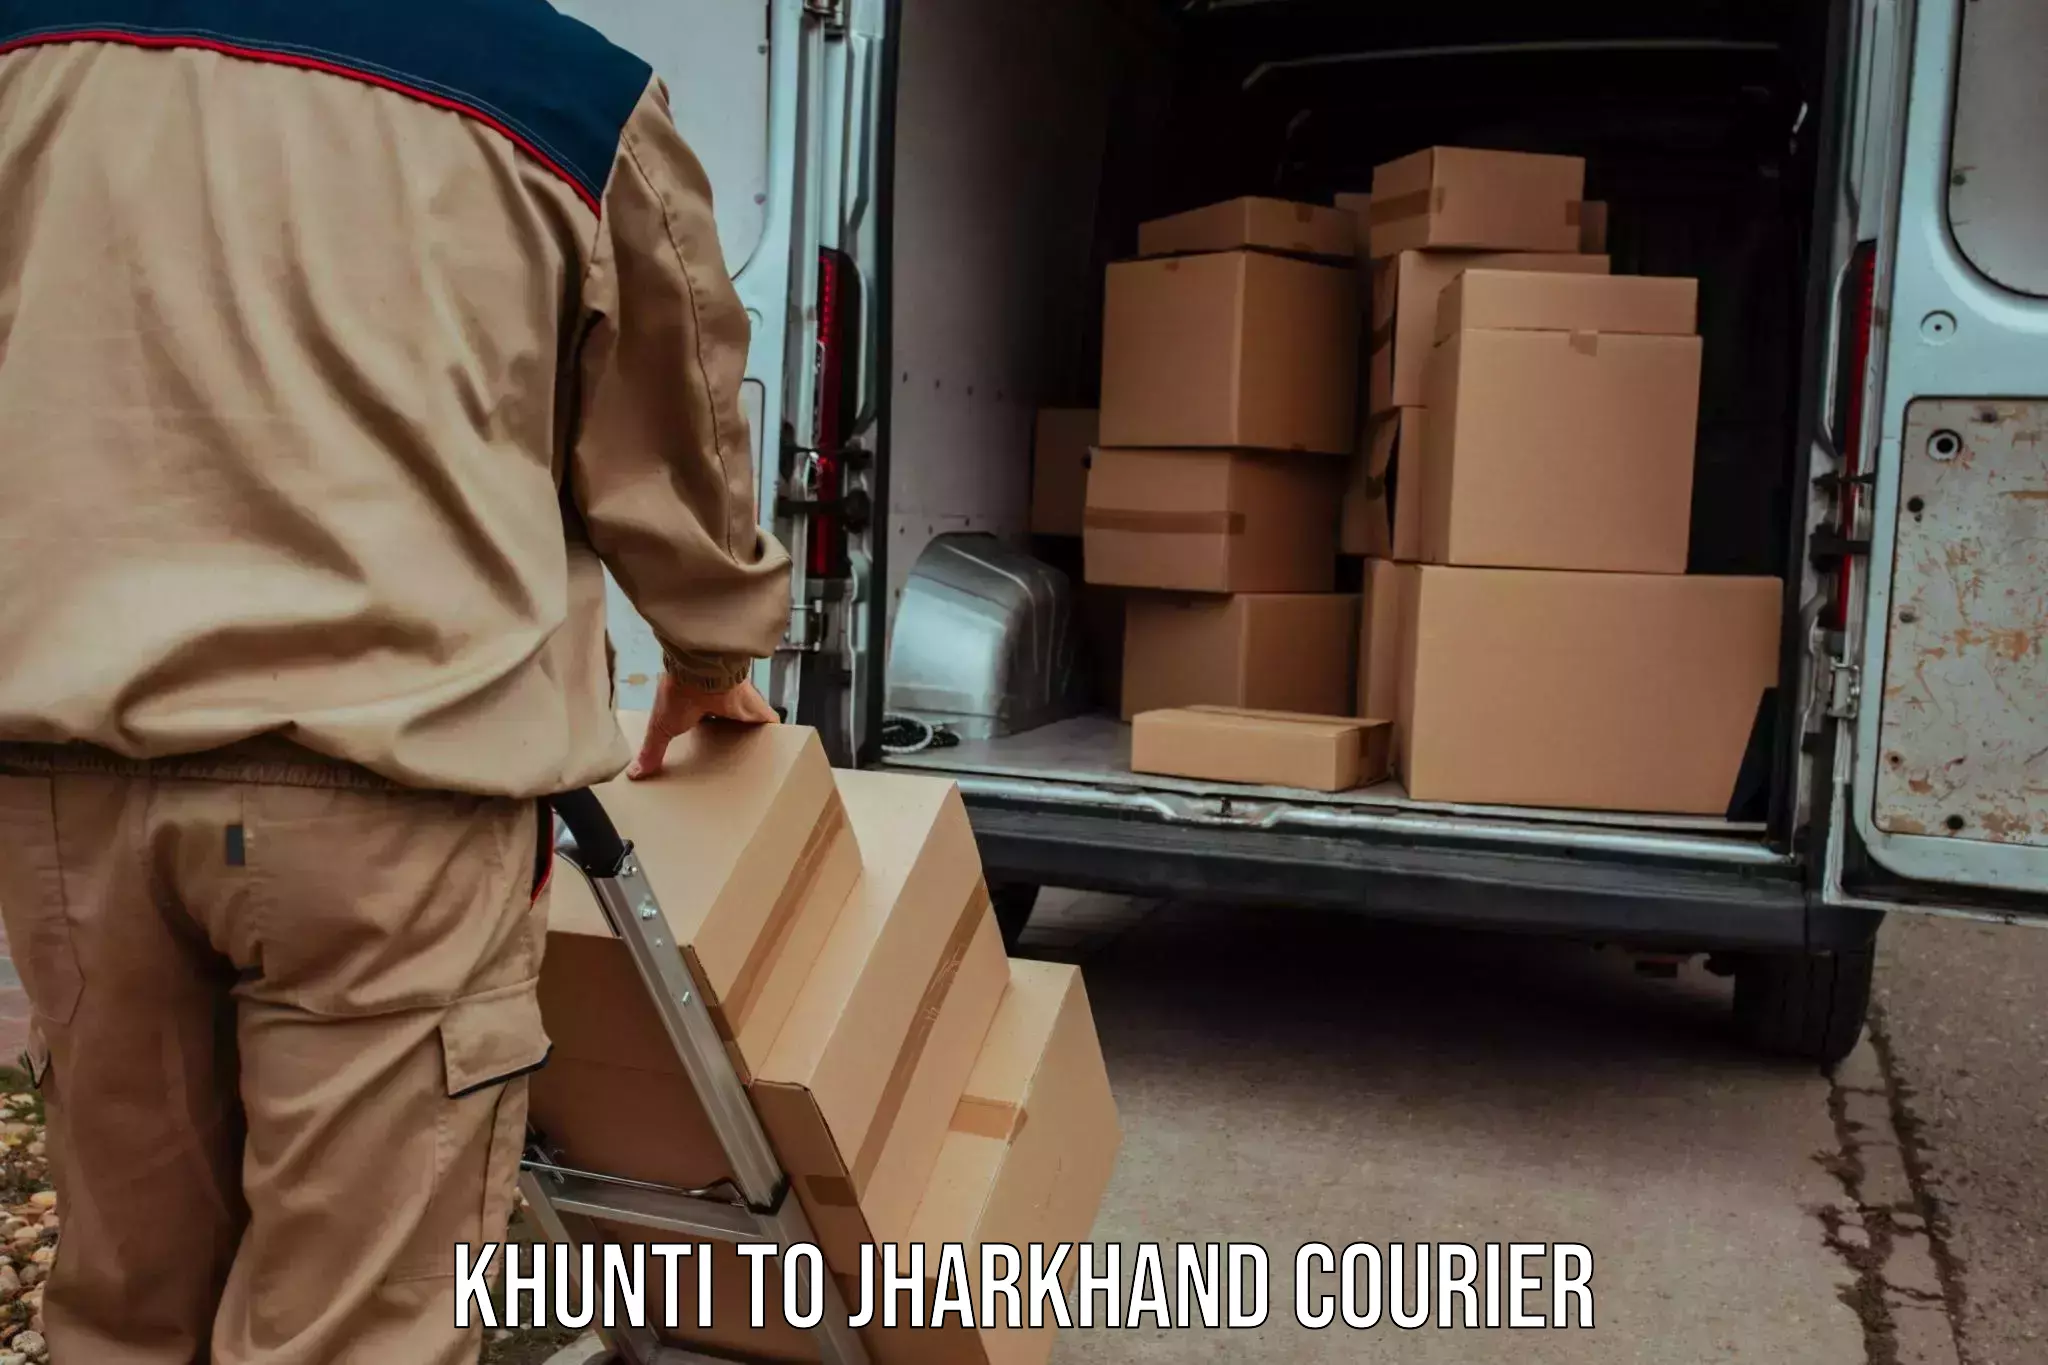 24-hour delivery options Khunti to Bagodar